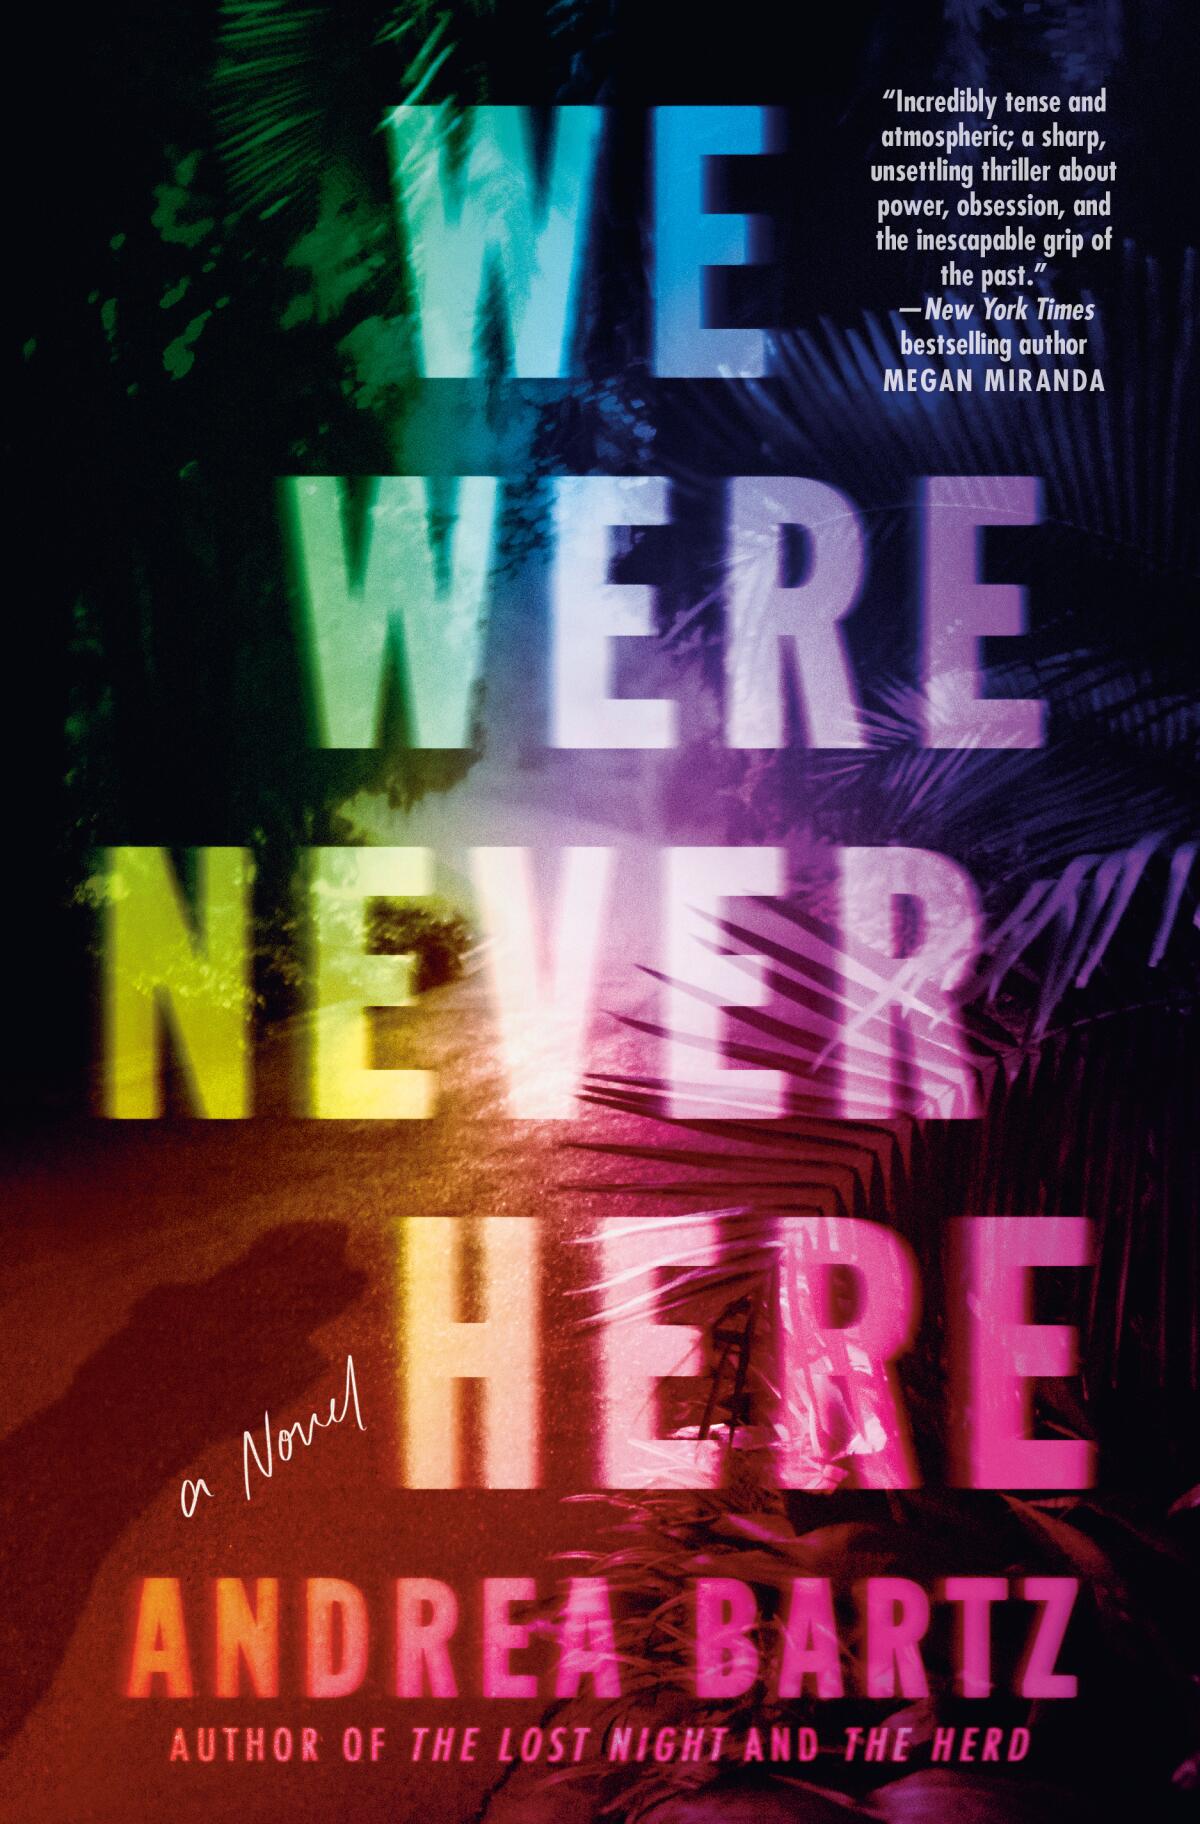 The cover of the book "We Were Never Here," by Andrea Bartz